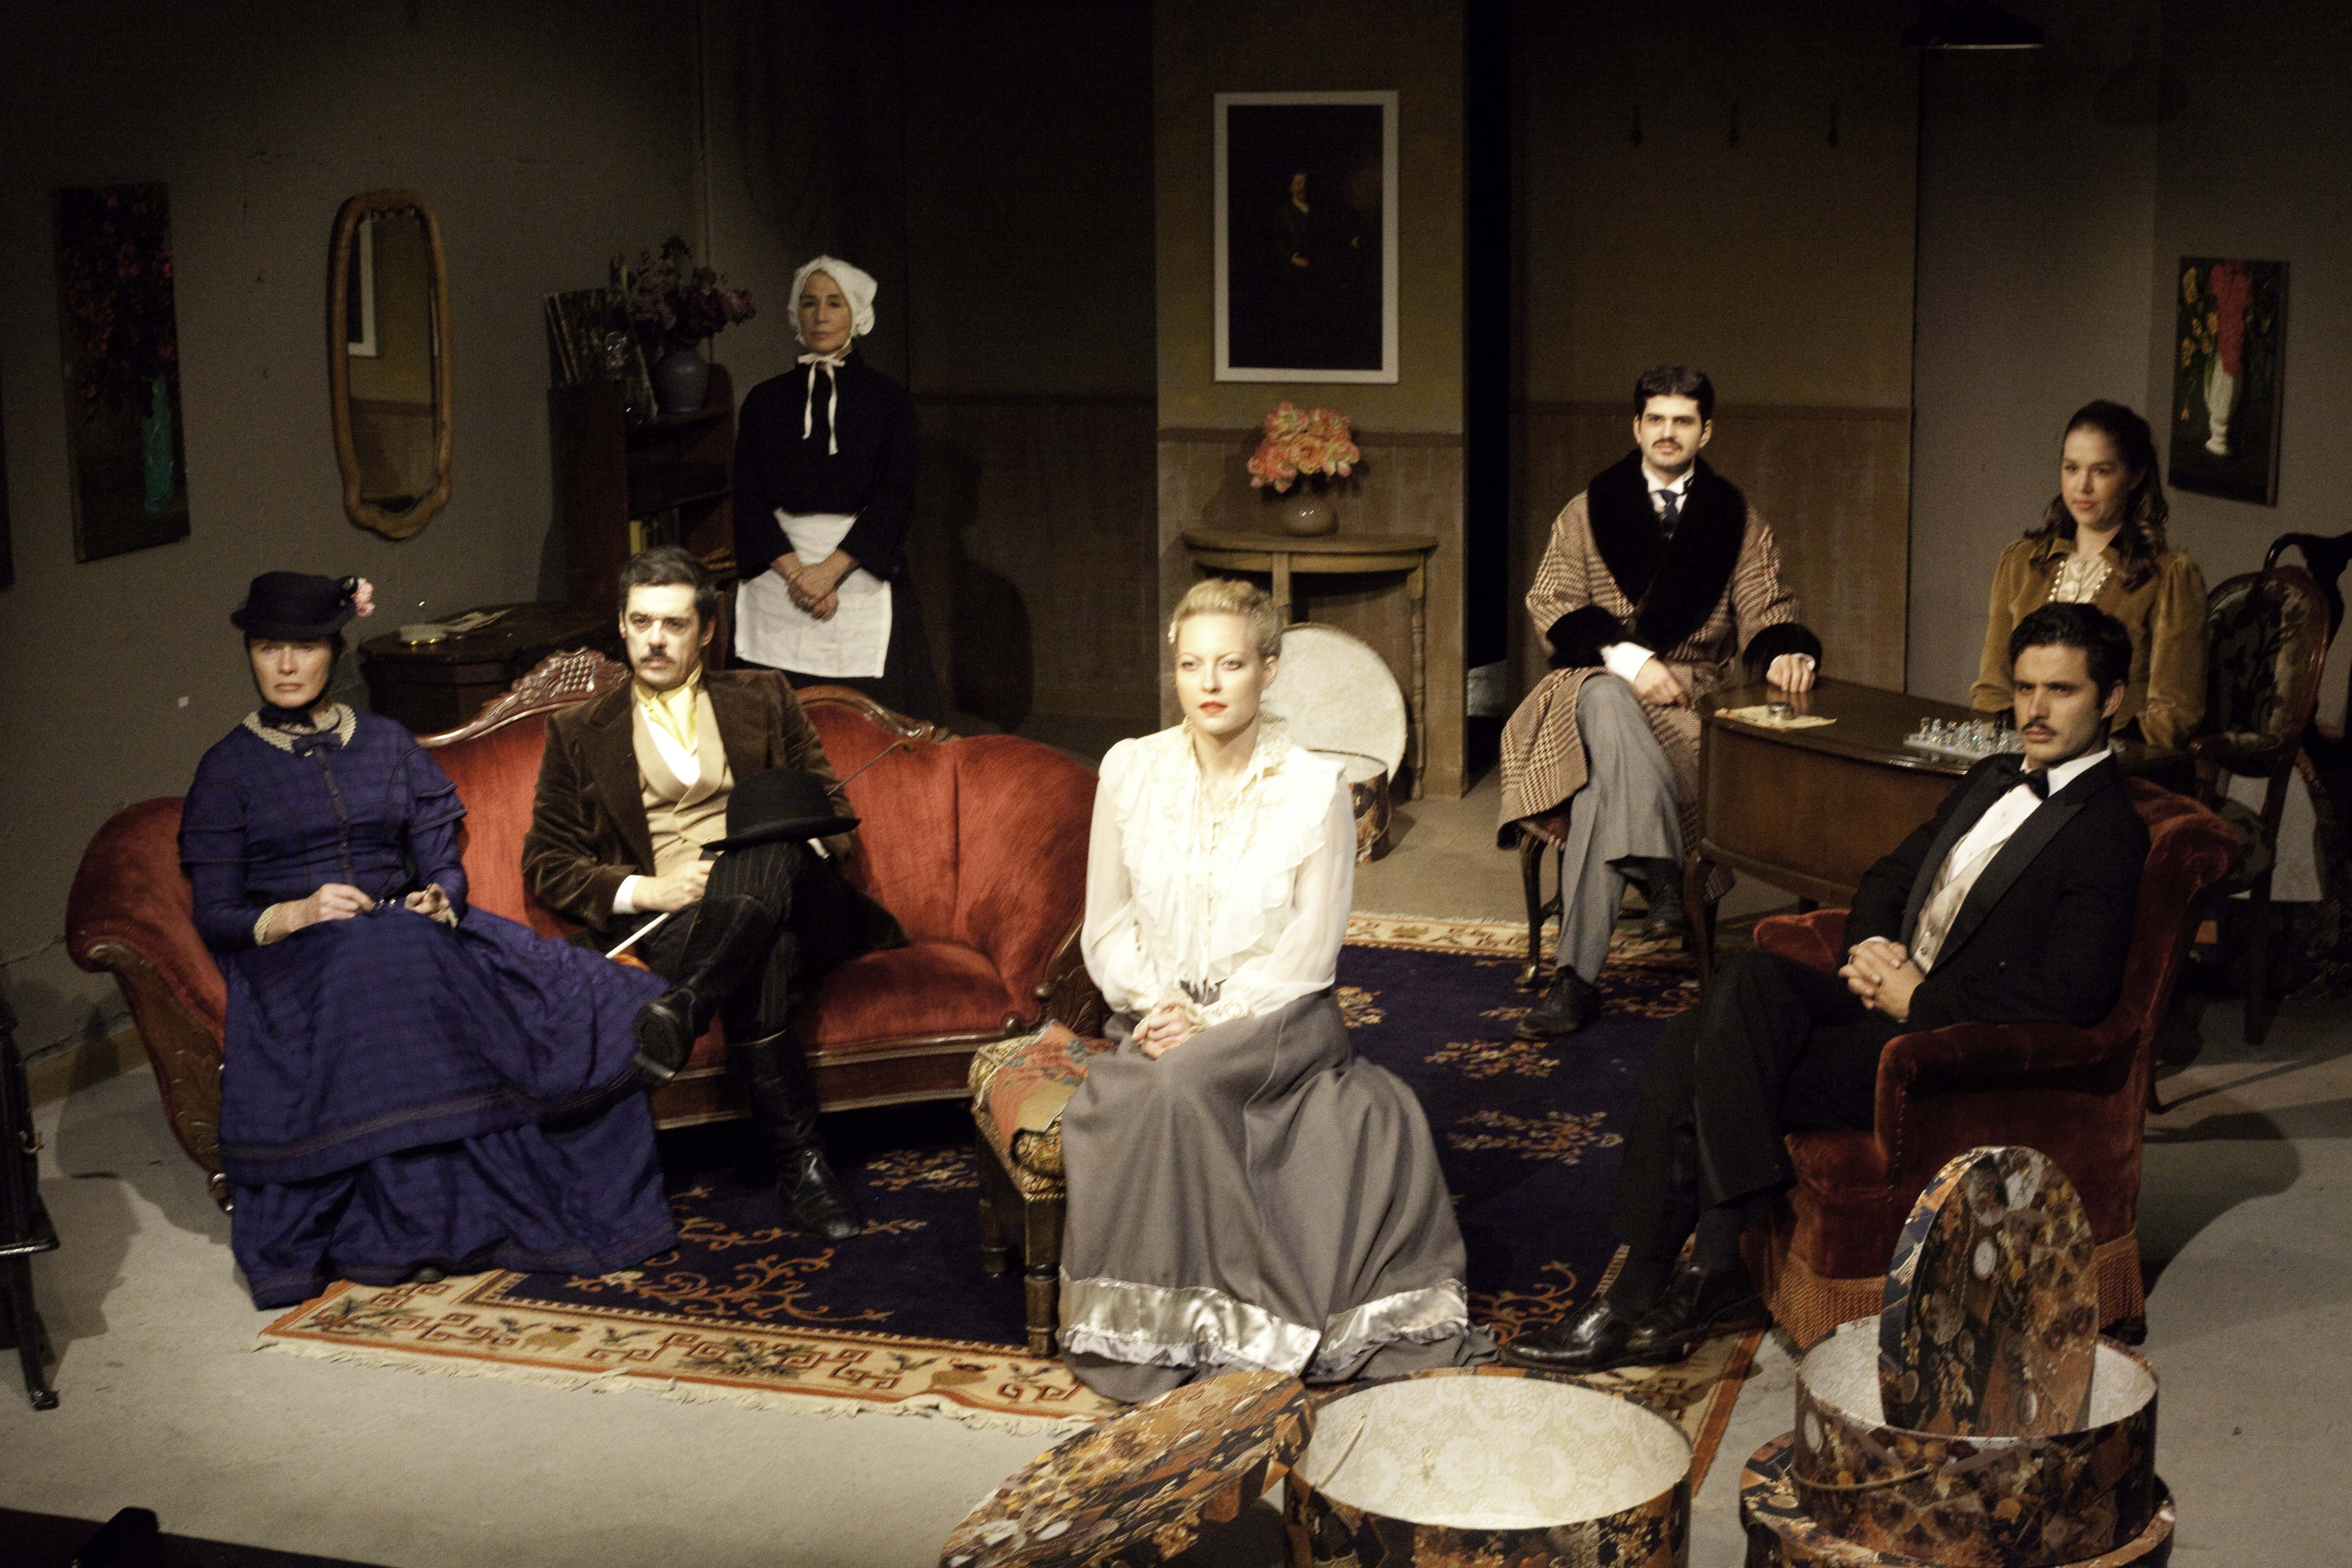 Laura Liguori (center) as Hedda Gabler in Ibsen's Hedda Gaber at the Pacific Resident Theatre.